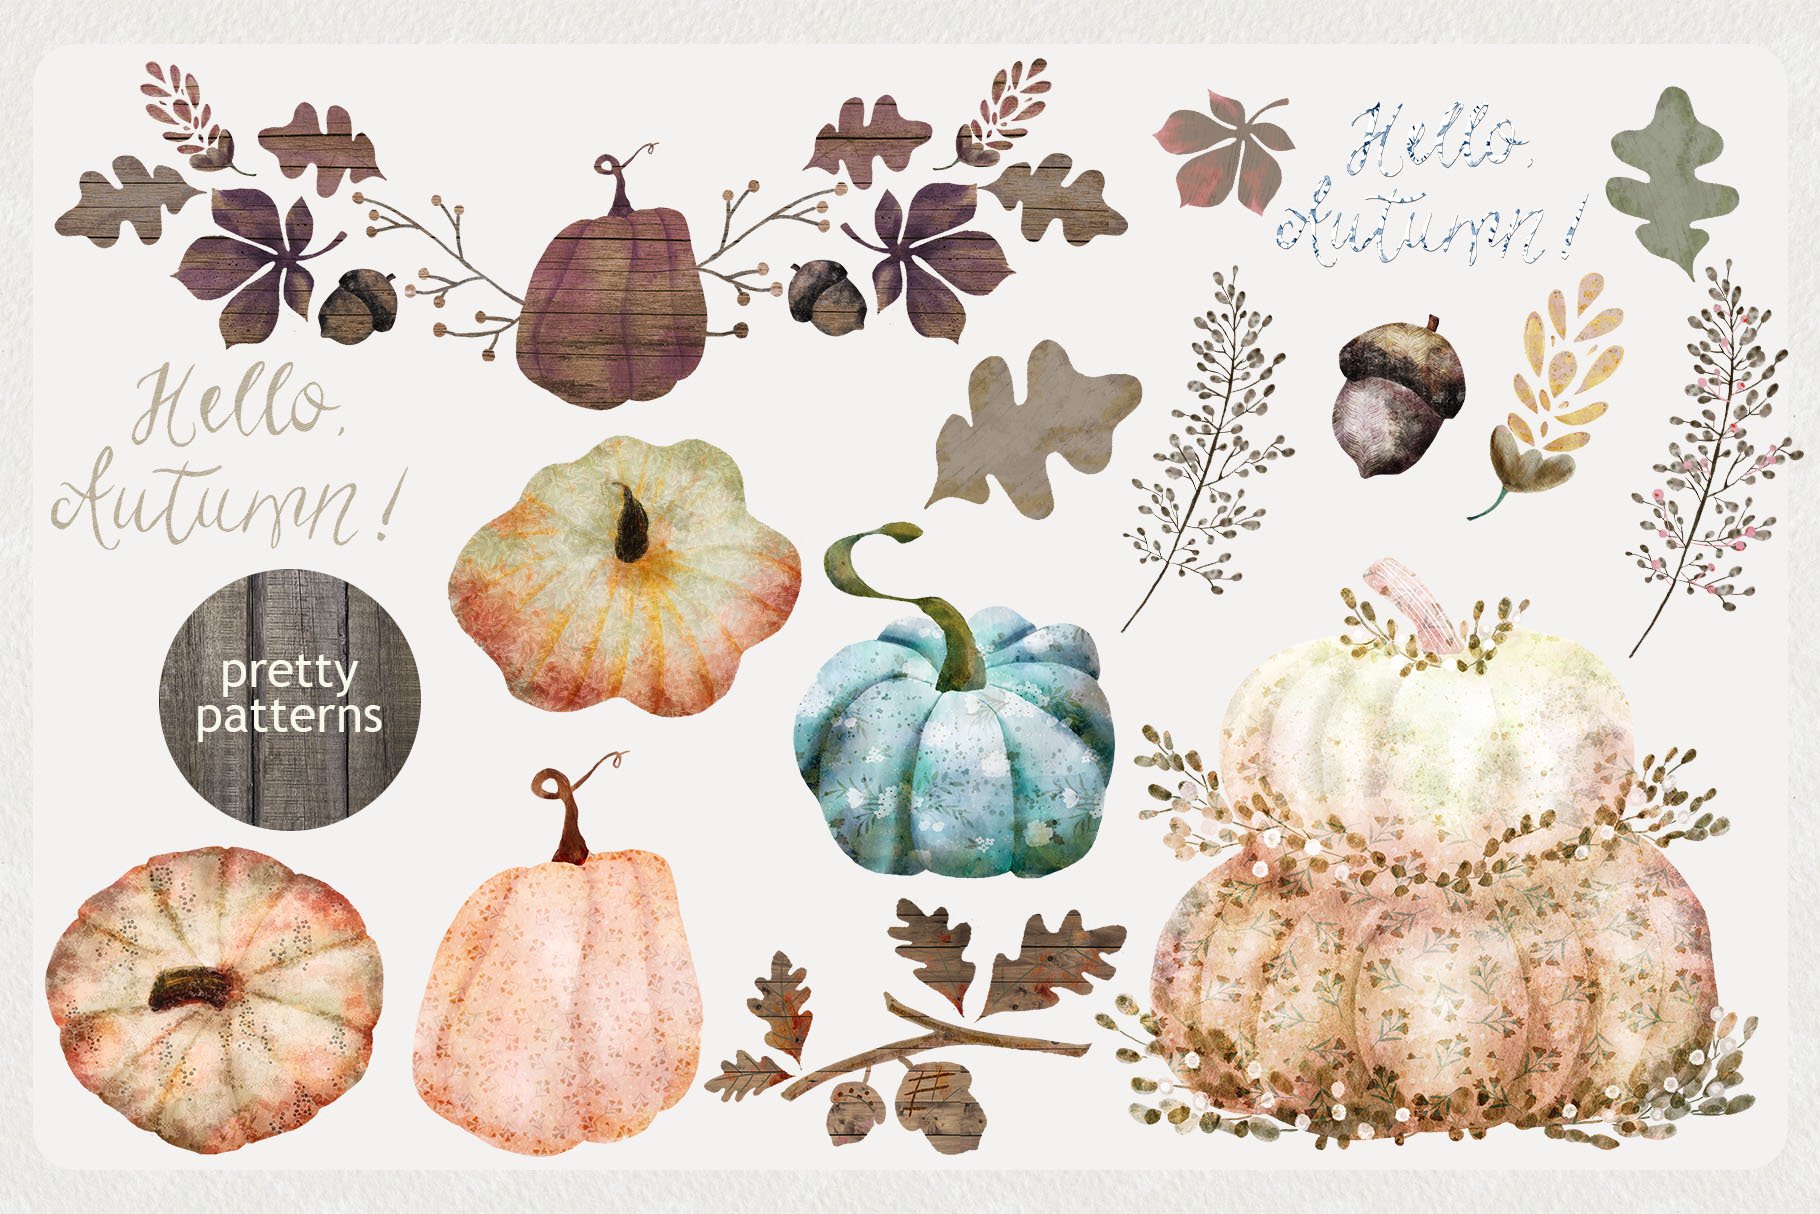 Nice autumn collection with pumpkins and other items.